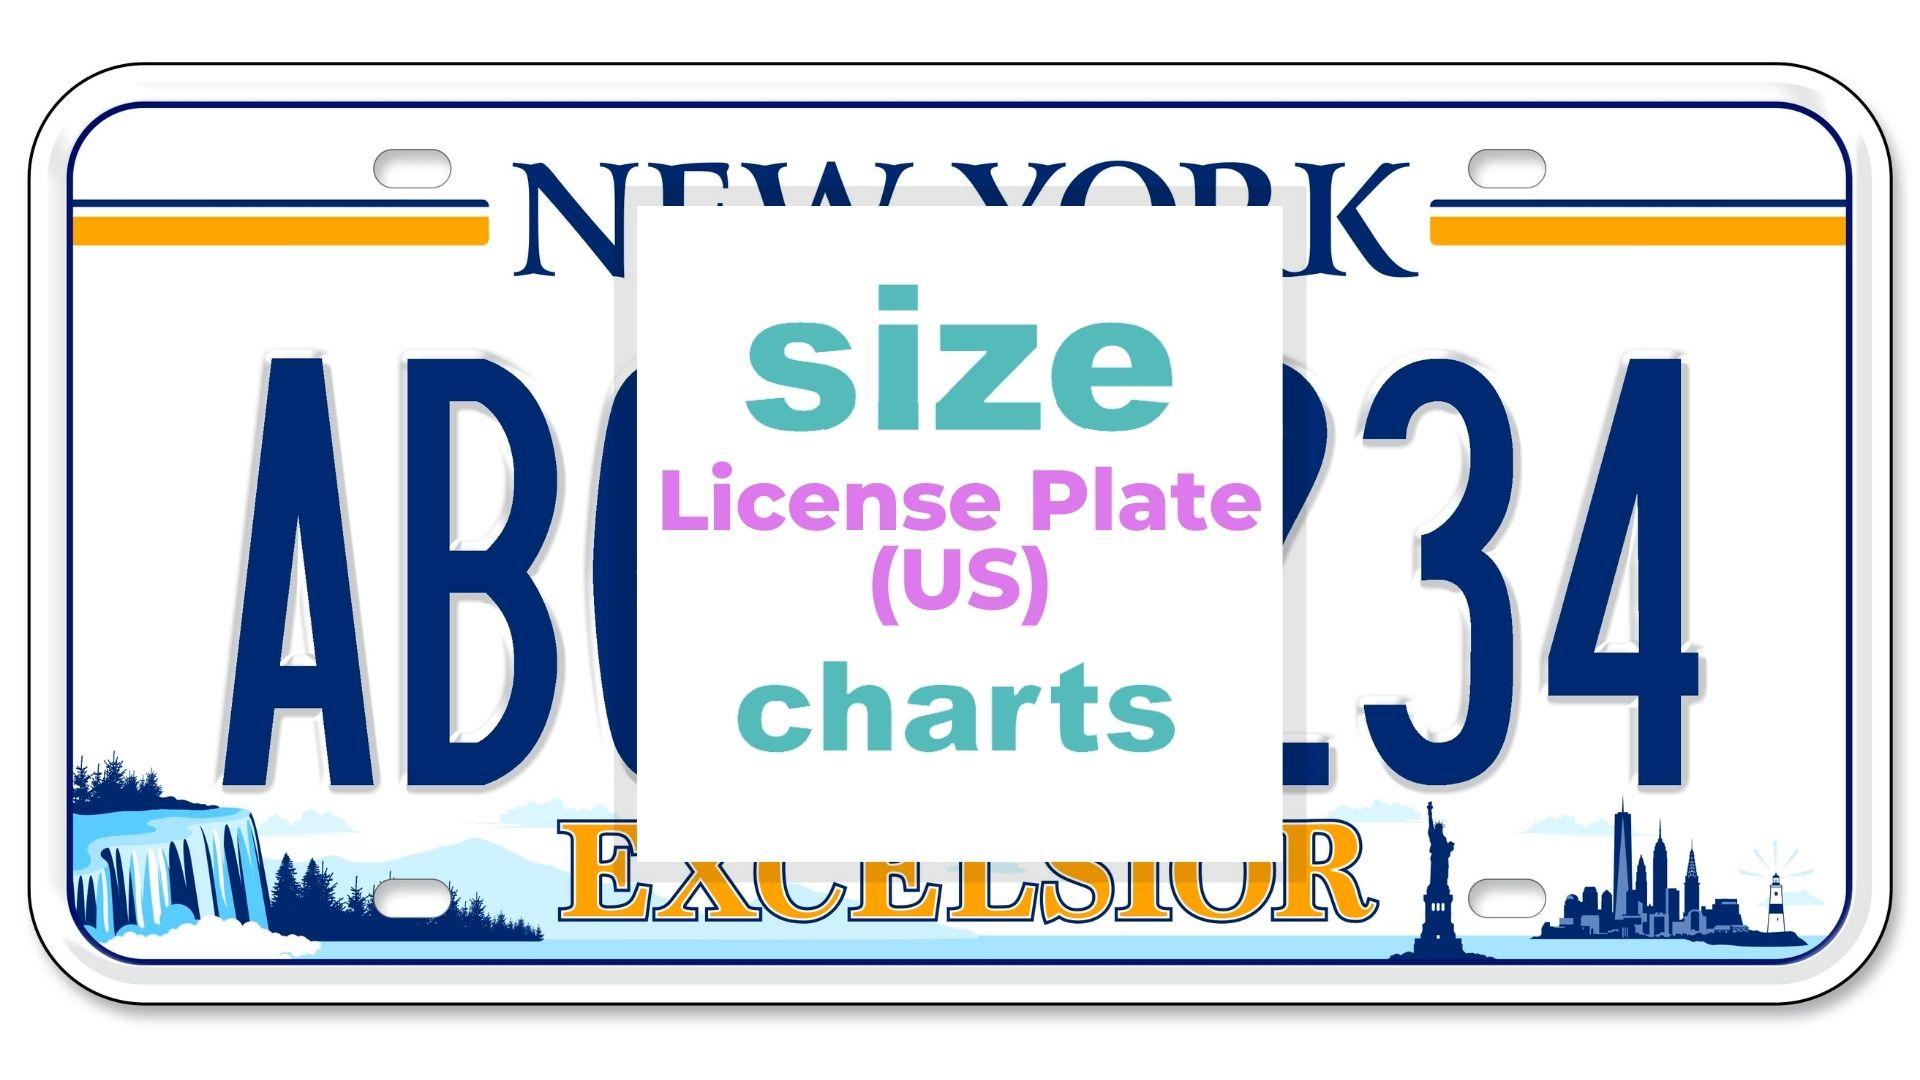 License Plate Size US Dimensions